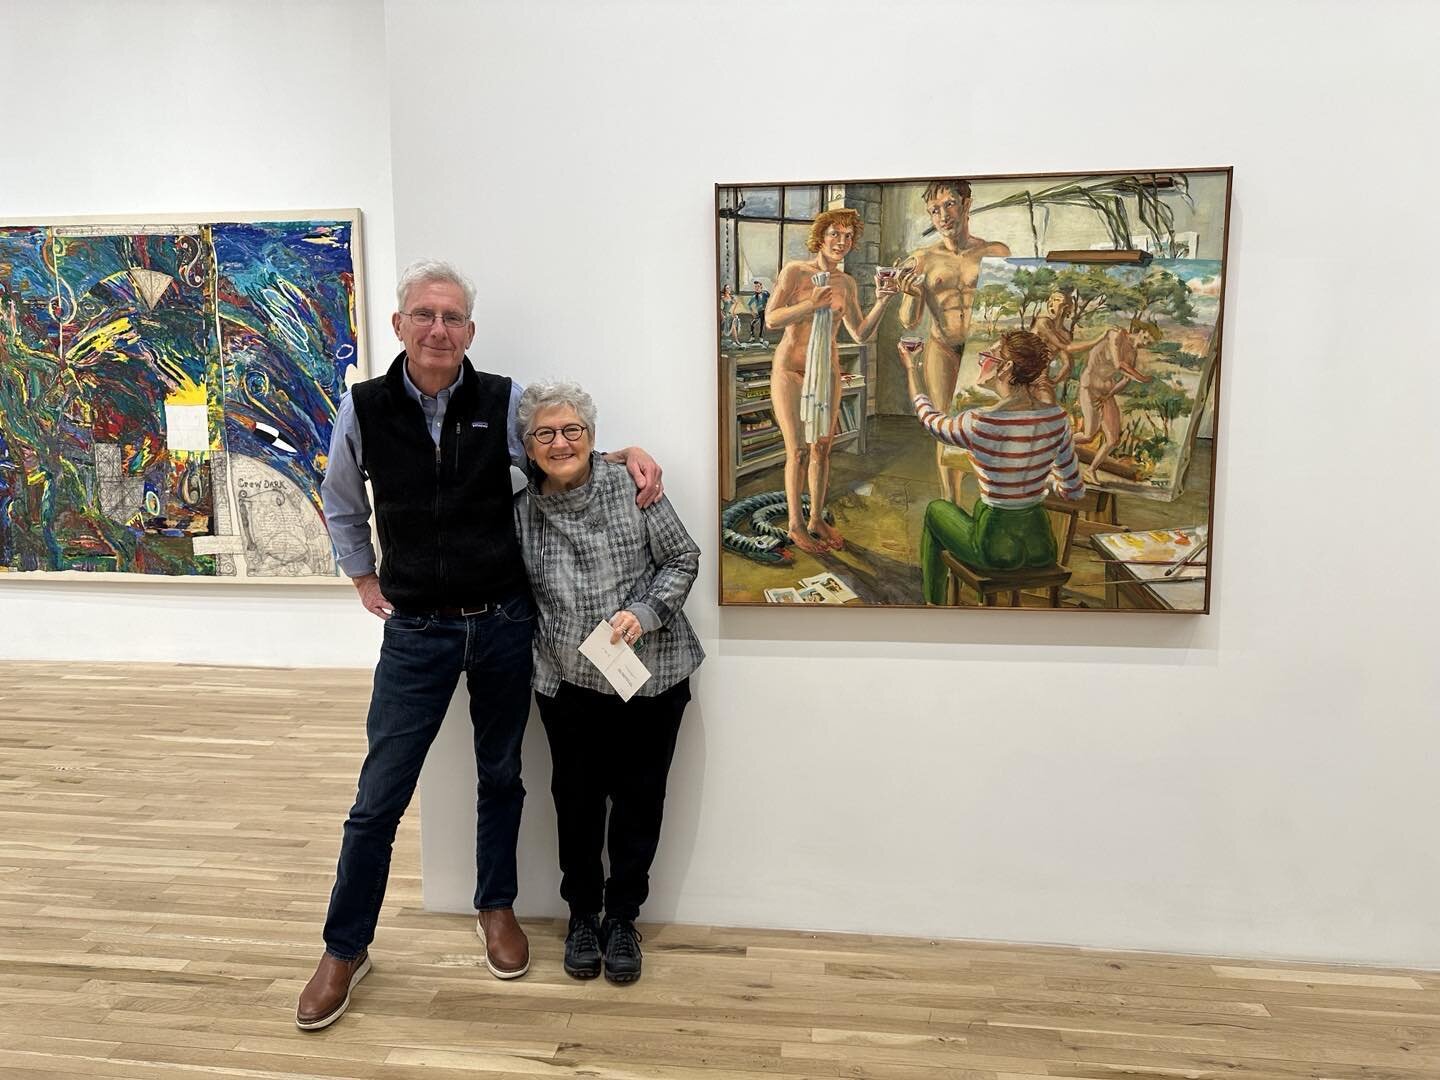 M. Louise Stanley with George Adams at her opening showing with work by Joan Brown, De Forest, T Wiley, and Viola Frey.